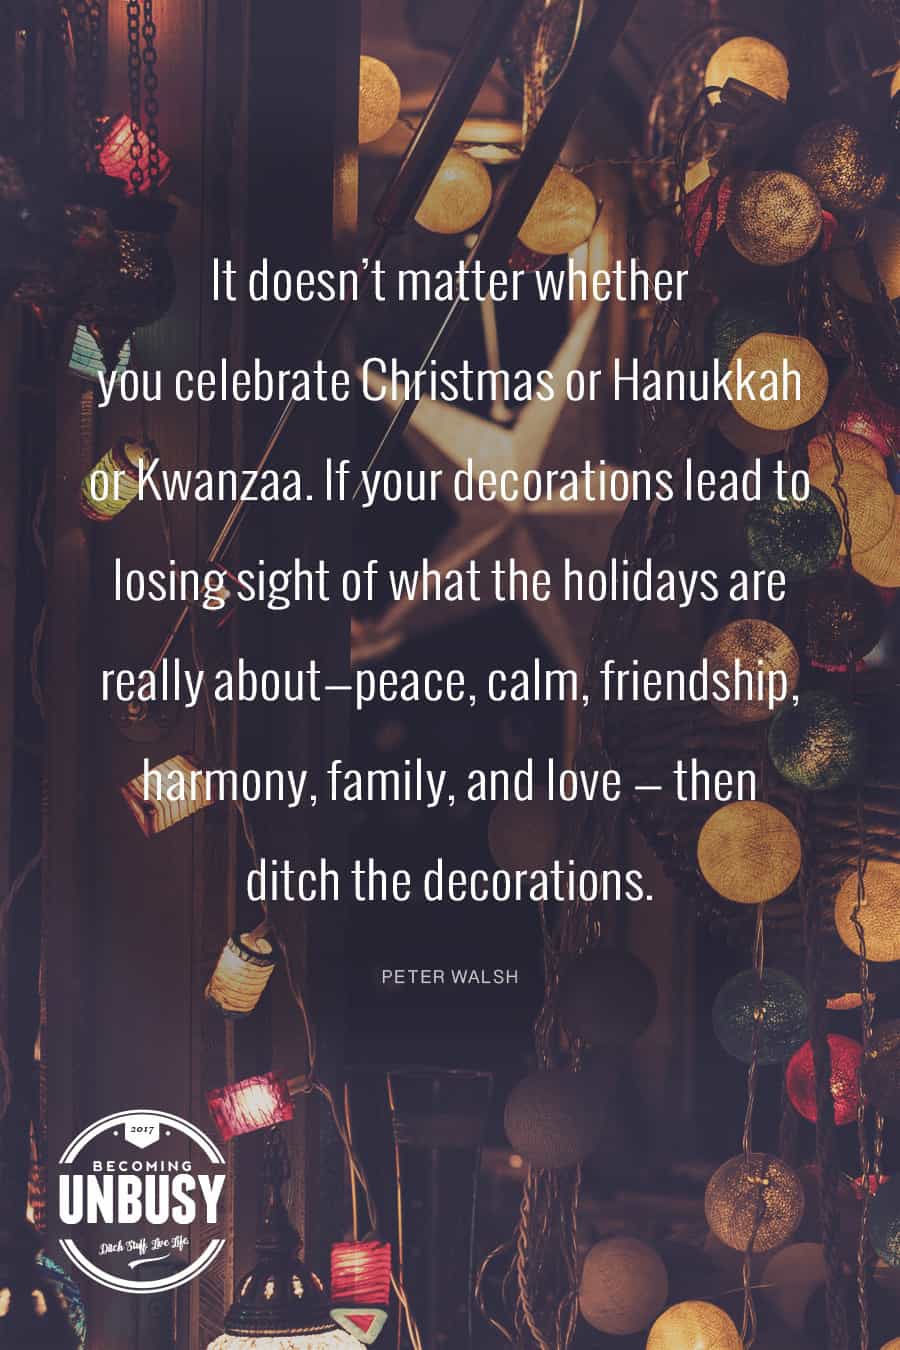 It doesn’t matter whether you celebrate Christmas or Hanukkah or Kwanzaa. If your decorations lead to losing sight of what the holidays are really about—peace, calm, friendship, harmony, family, and love — then ditch the decorations. Peter Walsh #quote #BecomingUnBusy *love this!